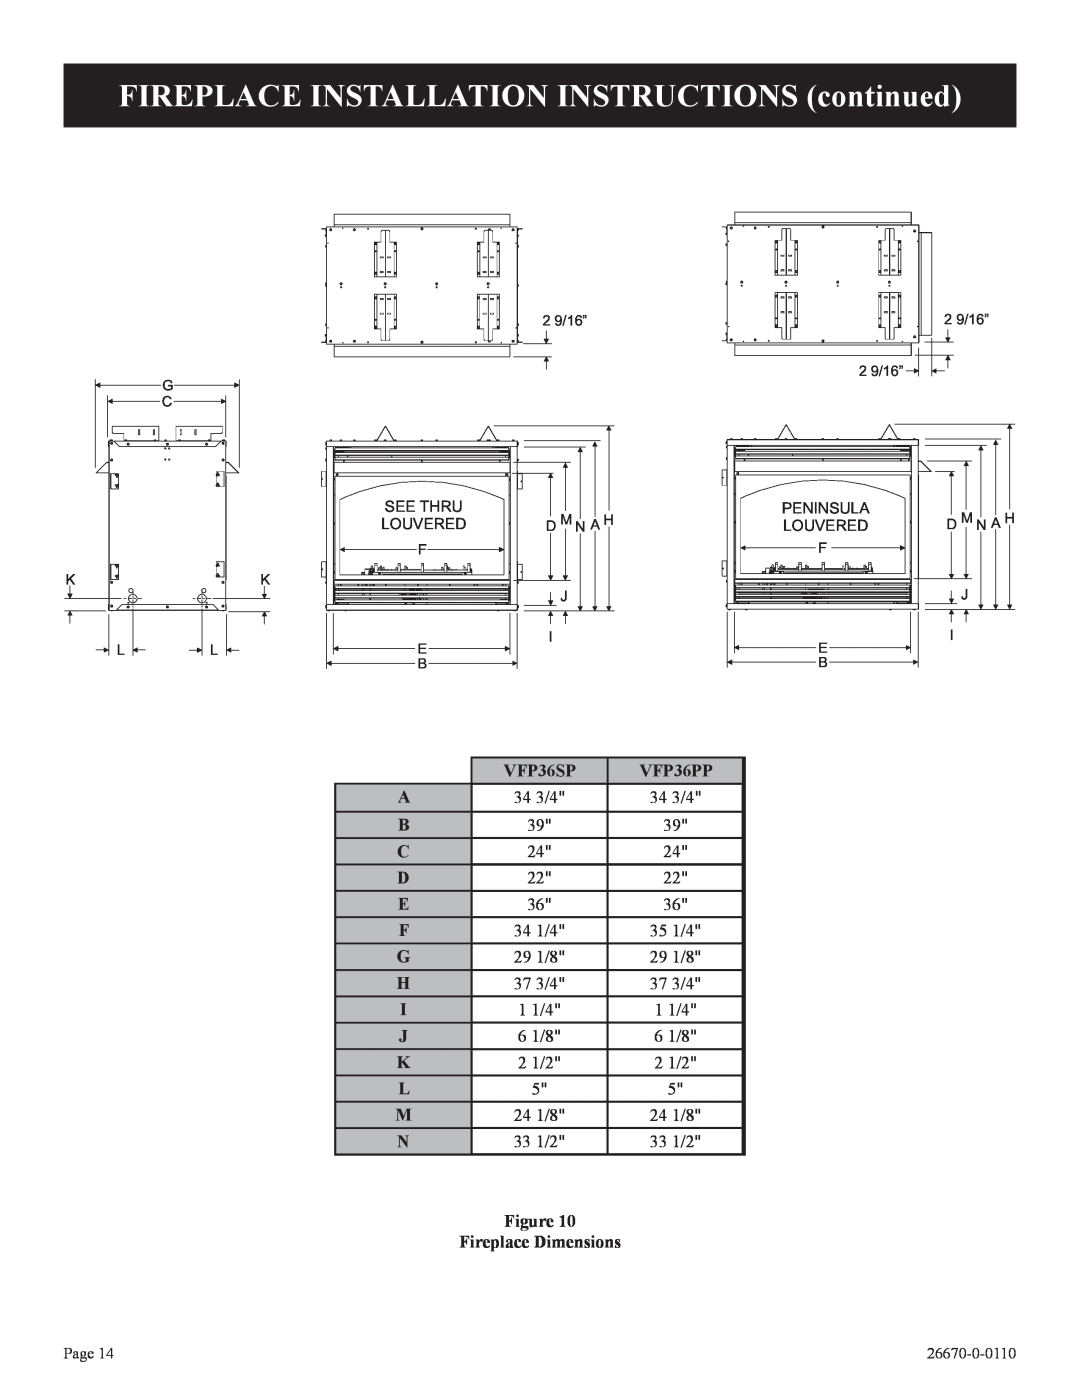 Empire Comfort Systems VFP36SP32EP-2 FIREPLACE INSTALLATION INSTRUCTIONS continued, VFP36PP, Figure Fireplace Dimensions 